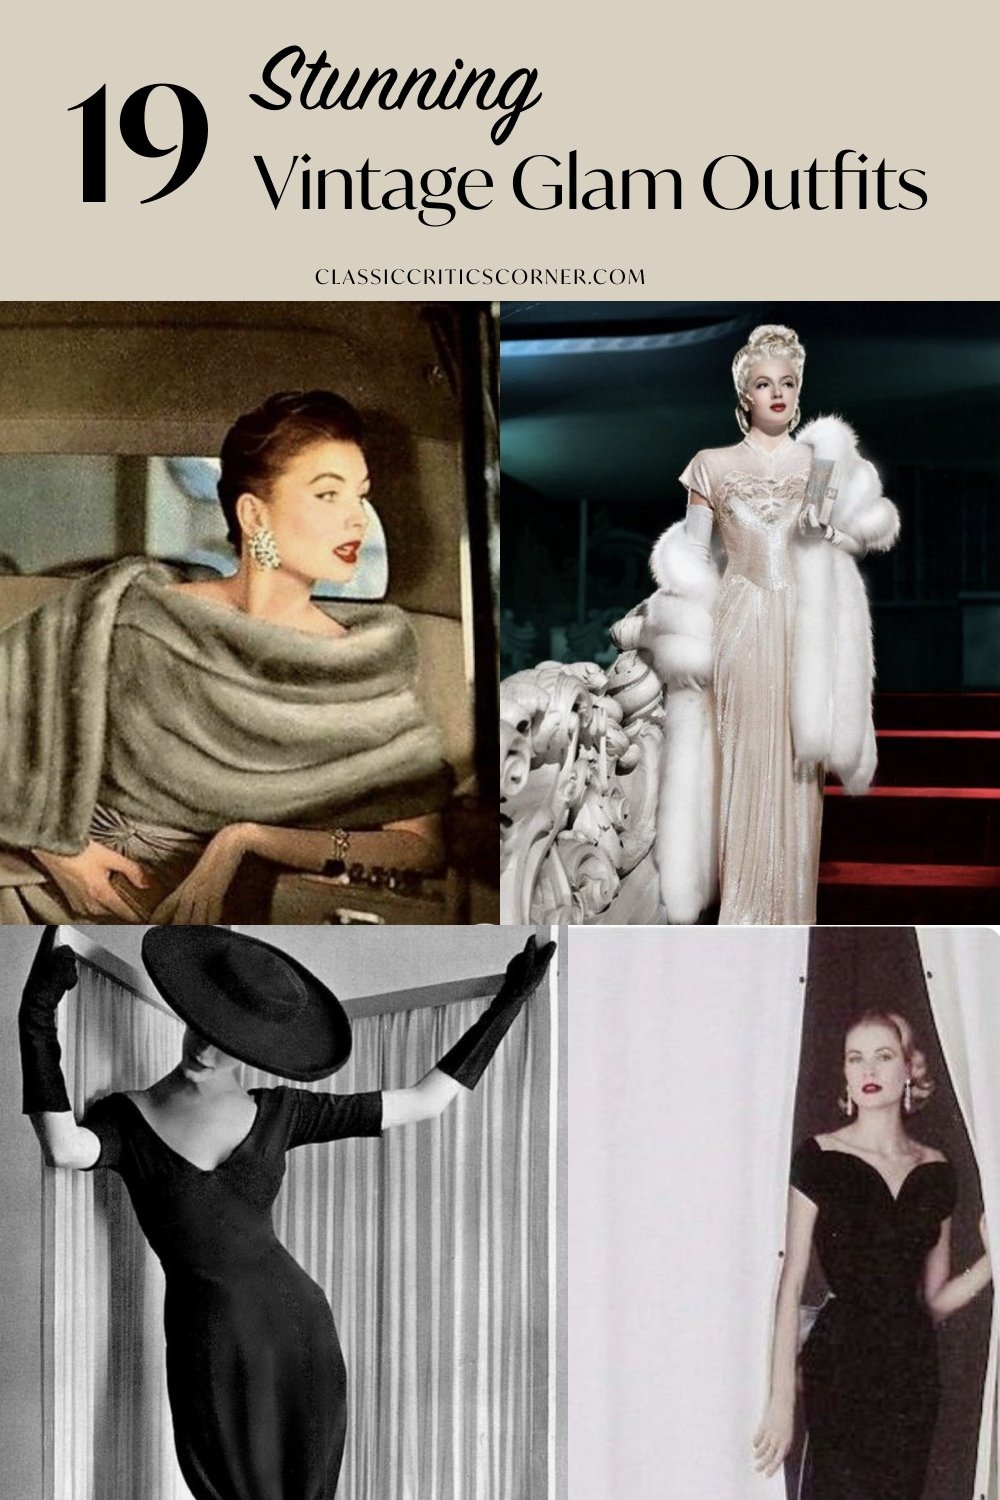 19 Stunning Vintage Glam Outfits — Classic Critics Corner - Vintage 1940s,  1950s, 1960s